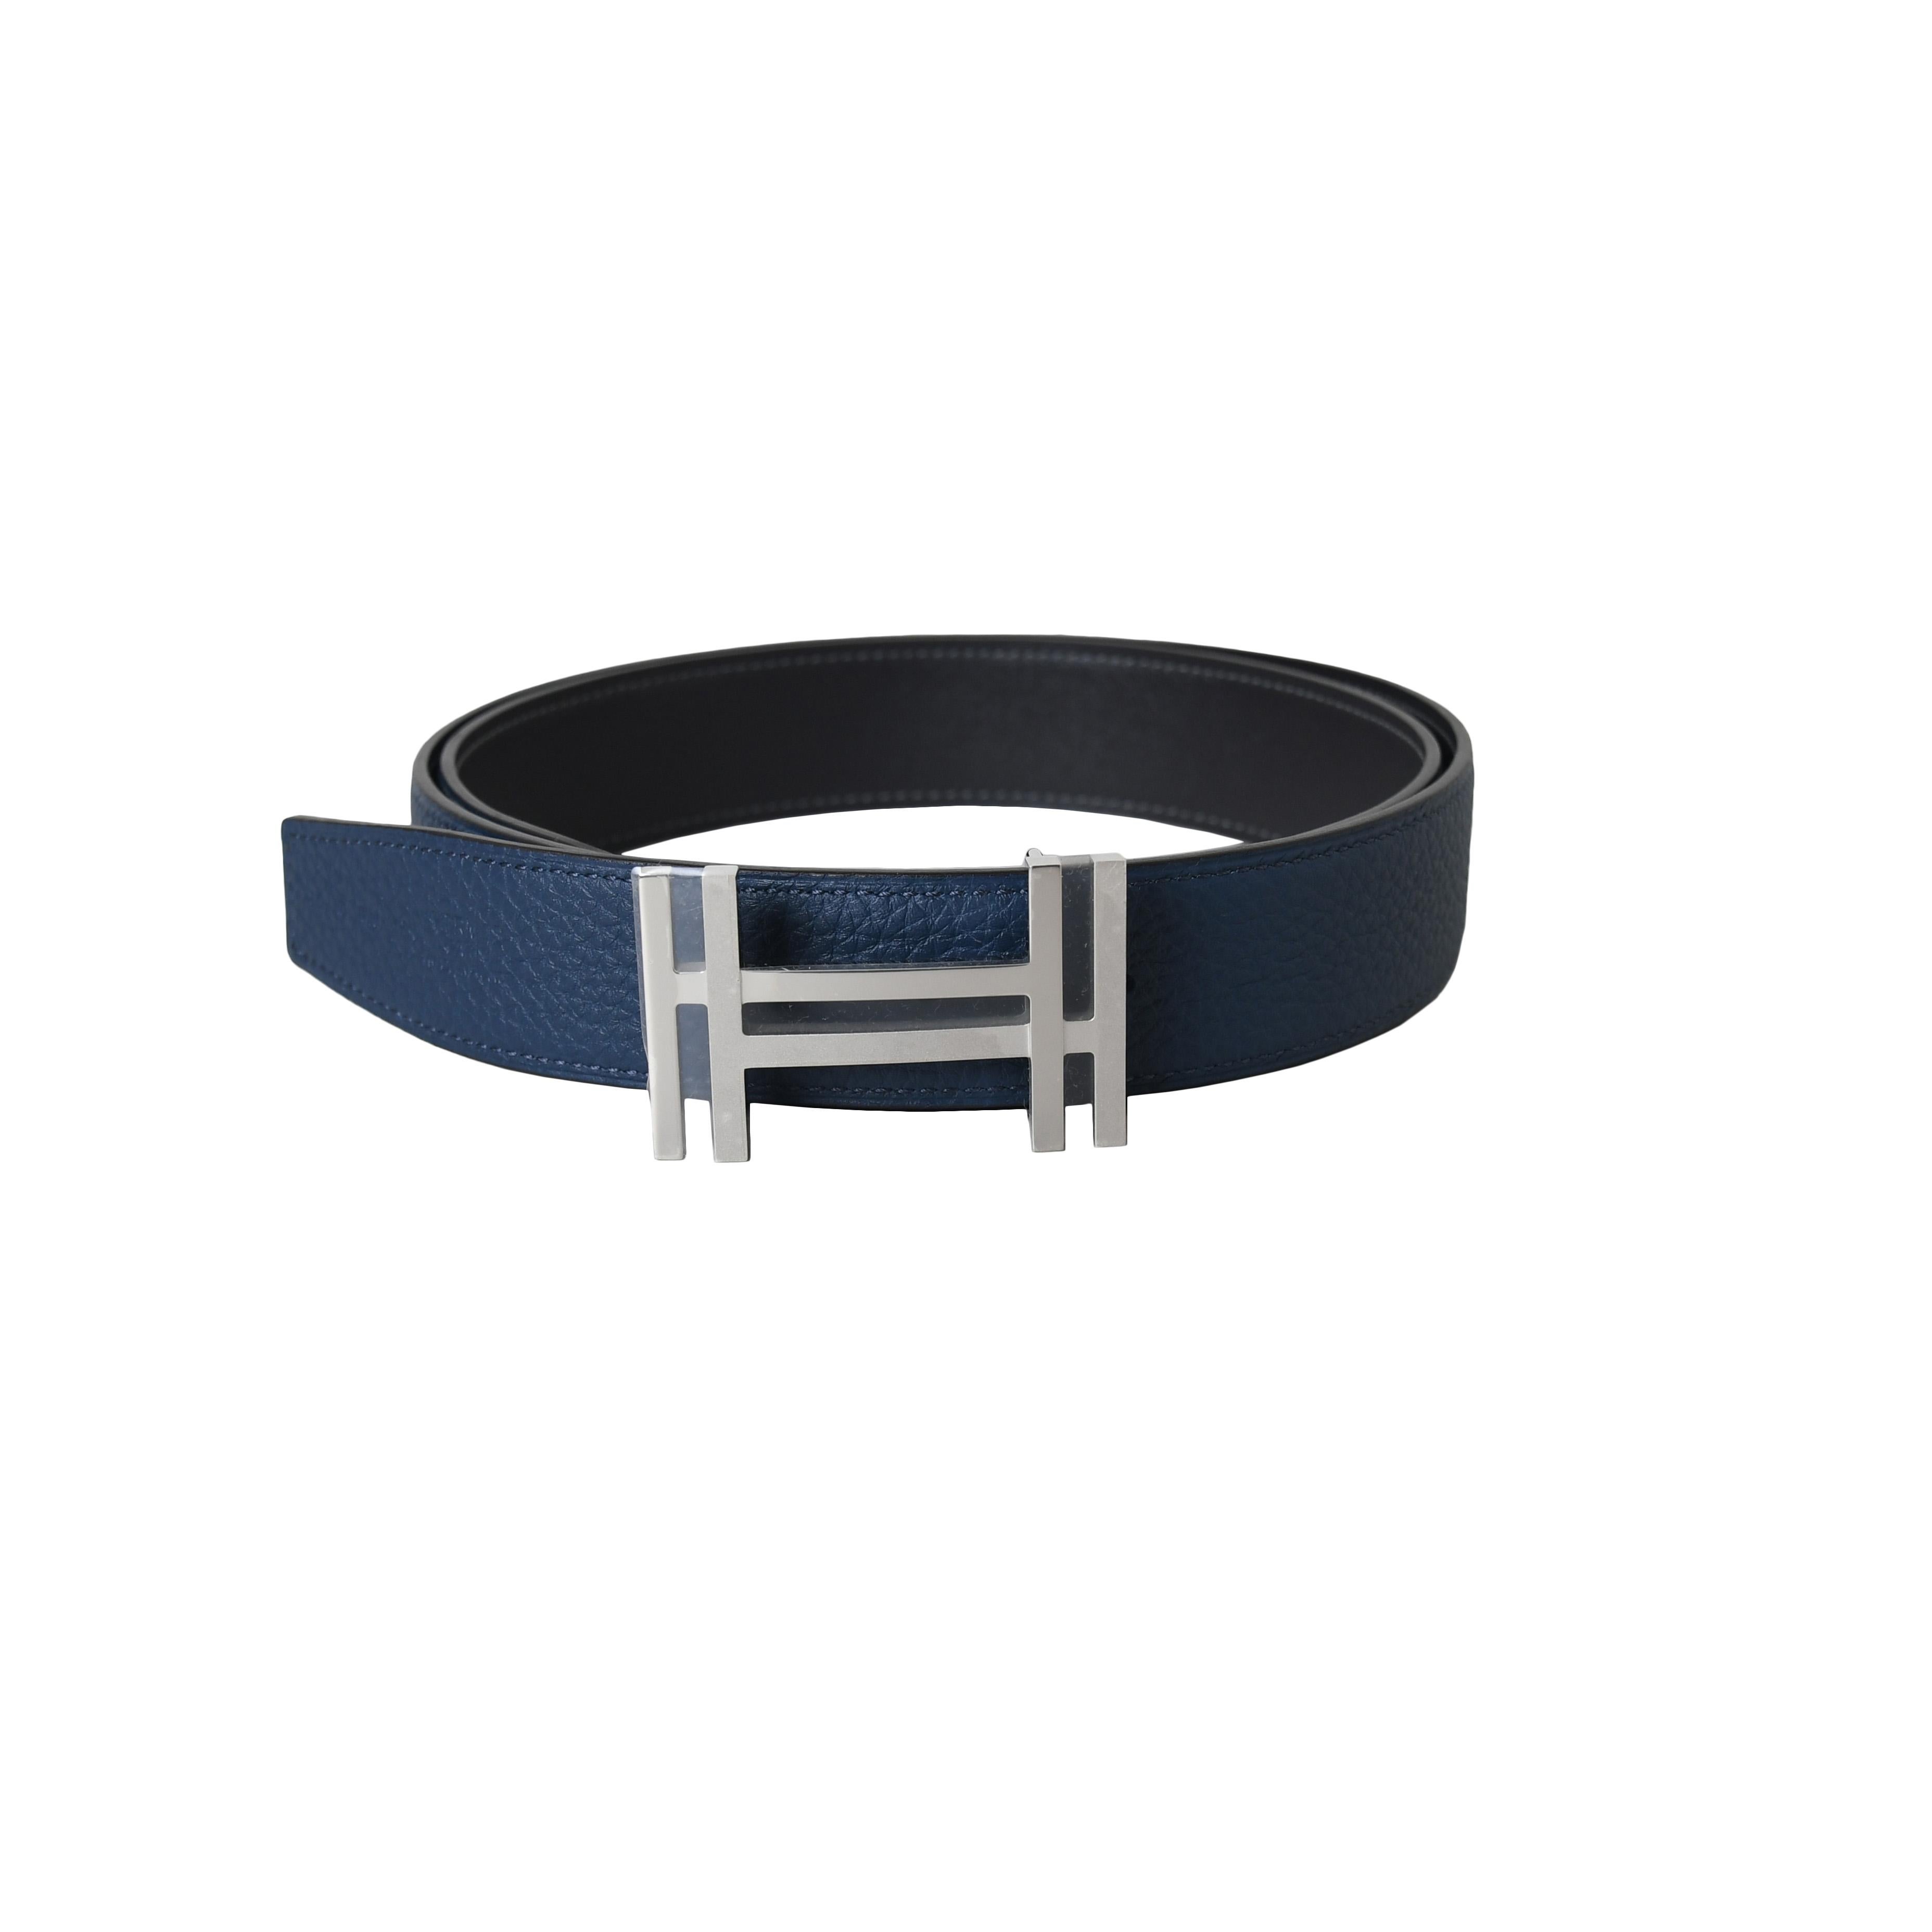 Hermes H Au Carre Belt Buckle & Reversible Leather Strap Silver Blue Black

Condition: 100% Brand New

Accompanied by: This item comes with all accessories

Do not hesitate if you have any questions, we will be glad to help. 

Only ONE available.